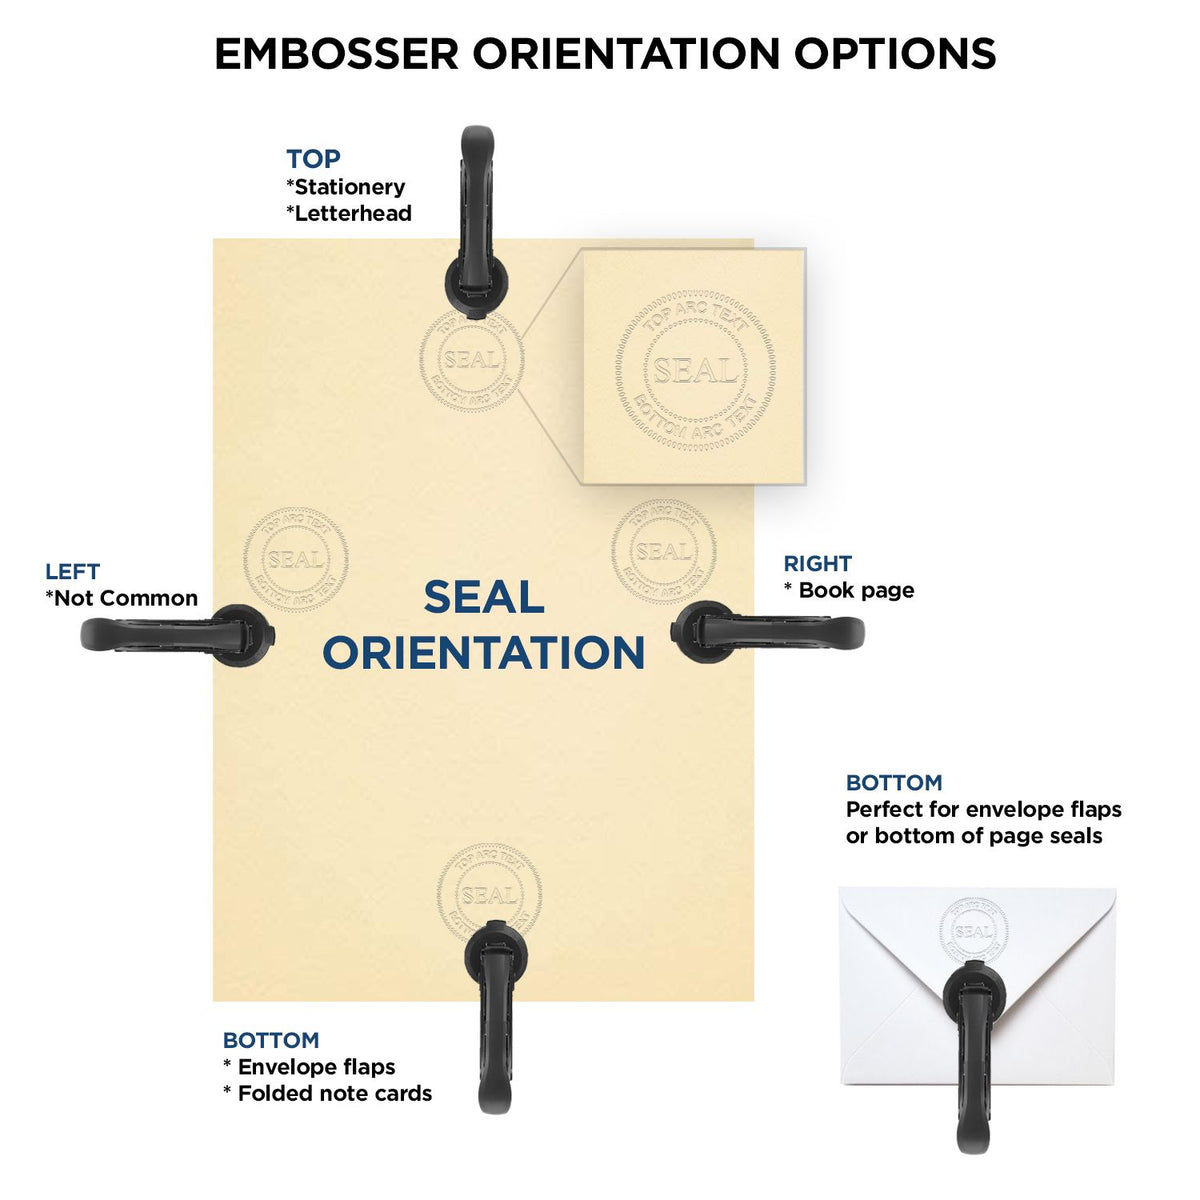 An infographic for the Hybrid Nebraska Land Surveyor Seal showing embosser orientation, this is showing examples of a top, bottom, right and left insert.